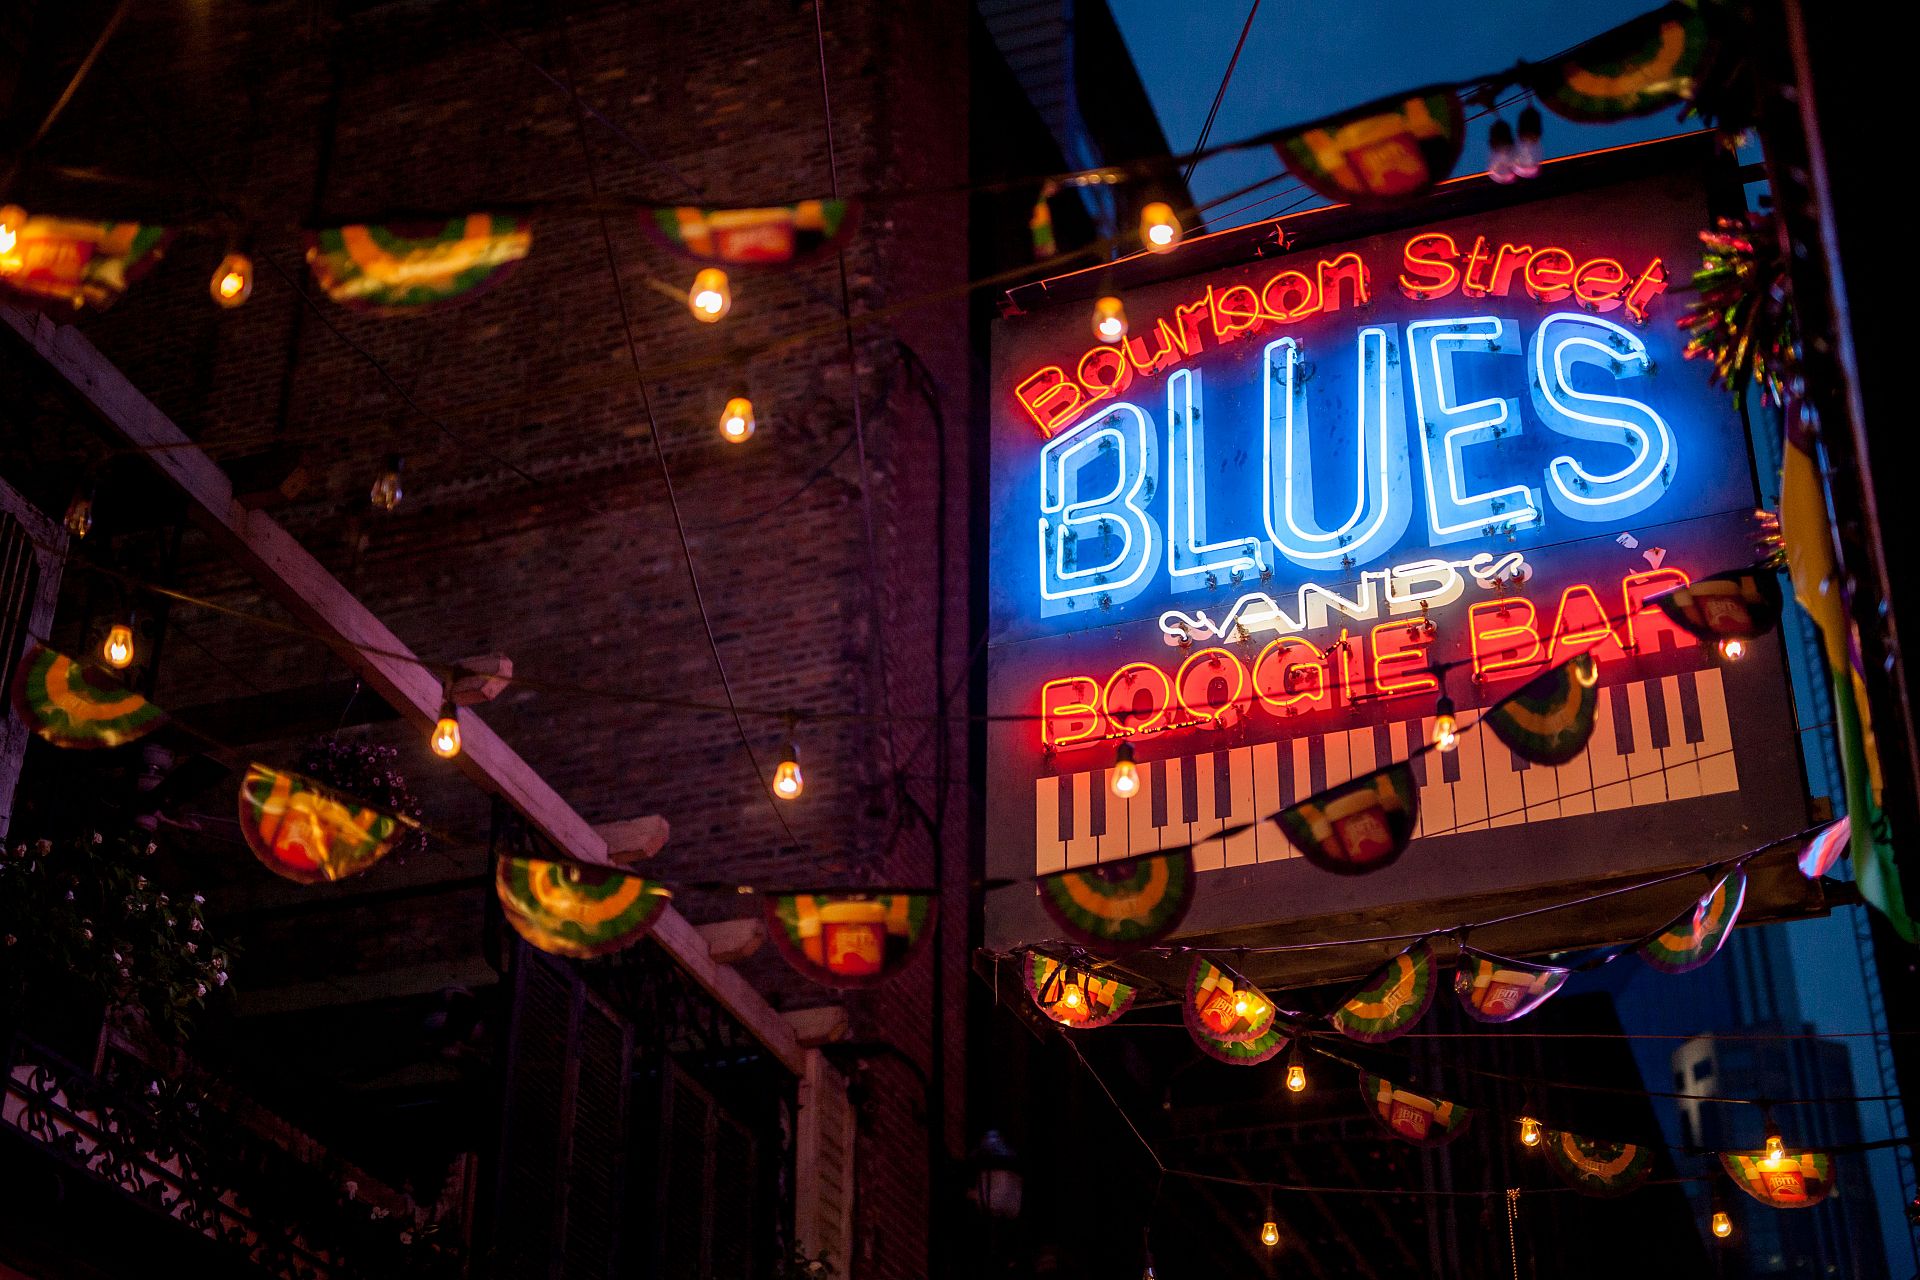 Bourbon Street Blues and Boogie Bar Sign in Printers Alley